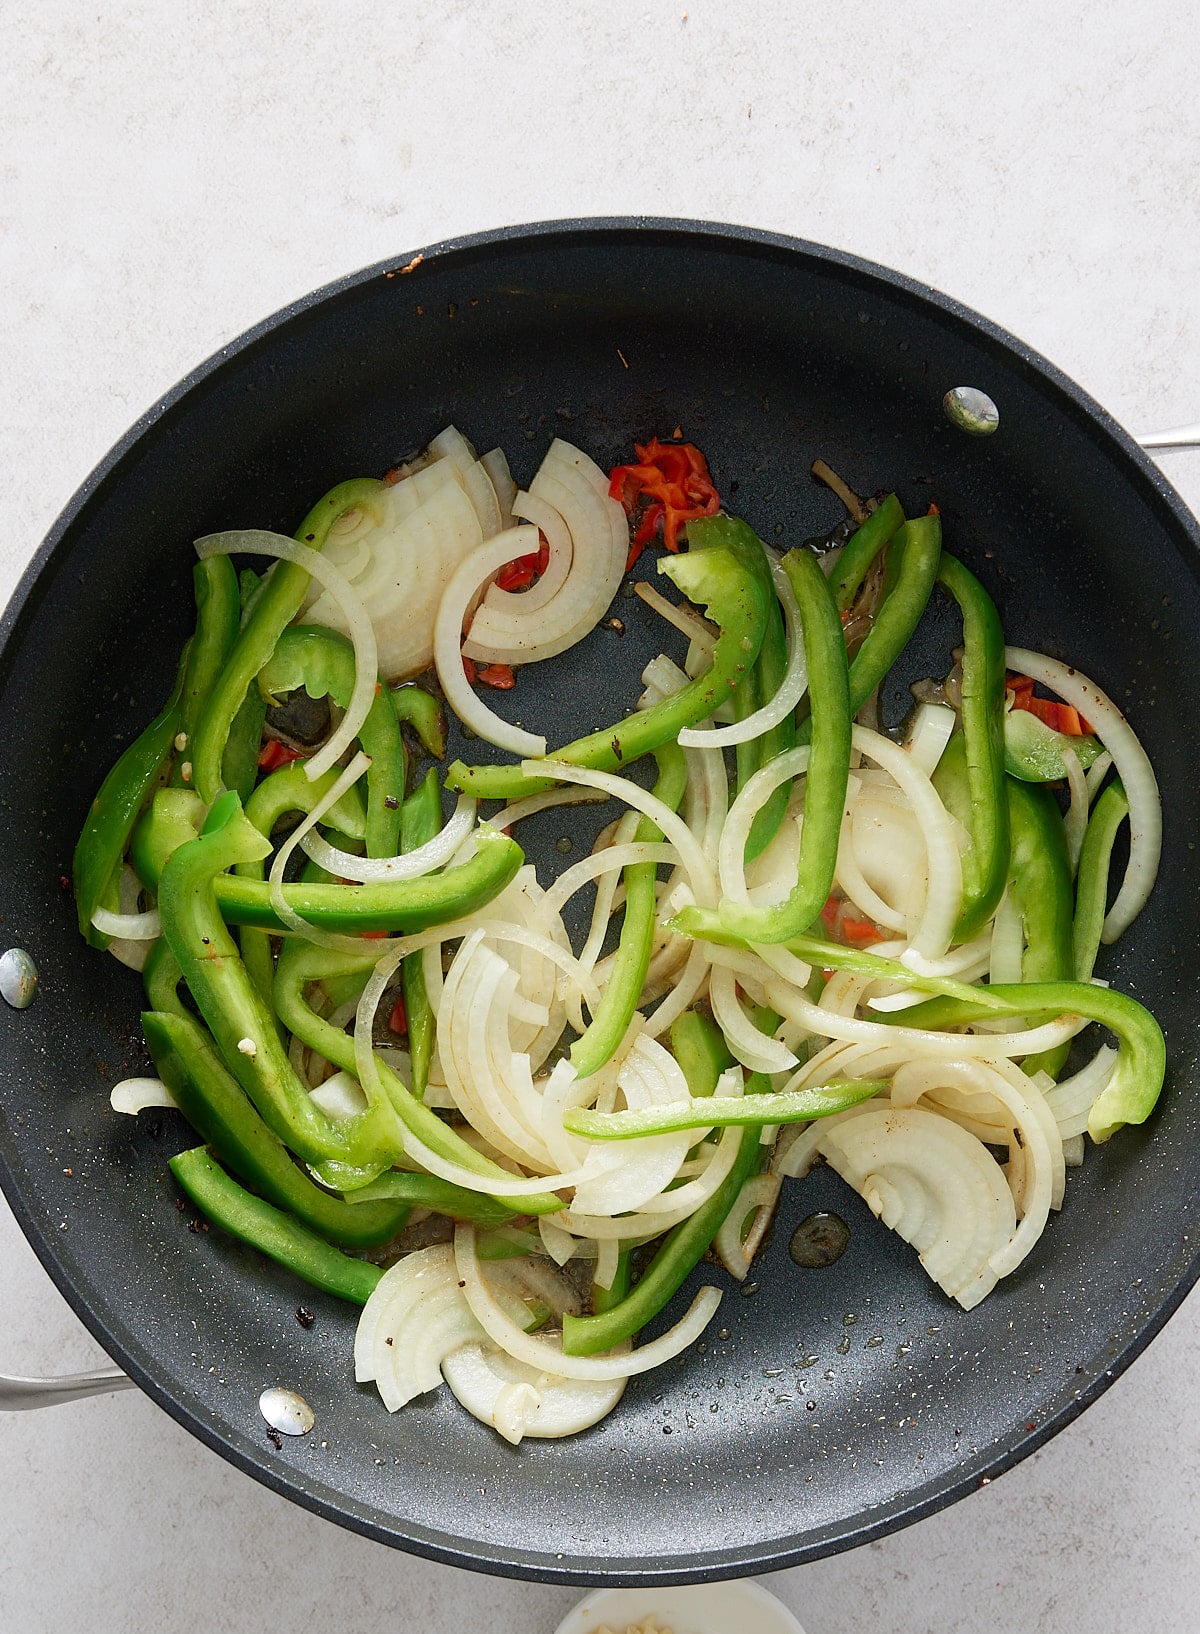 A black non-stick skillet containing sliced onion, green bell pepper and chopped red chili